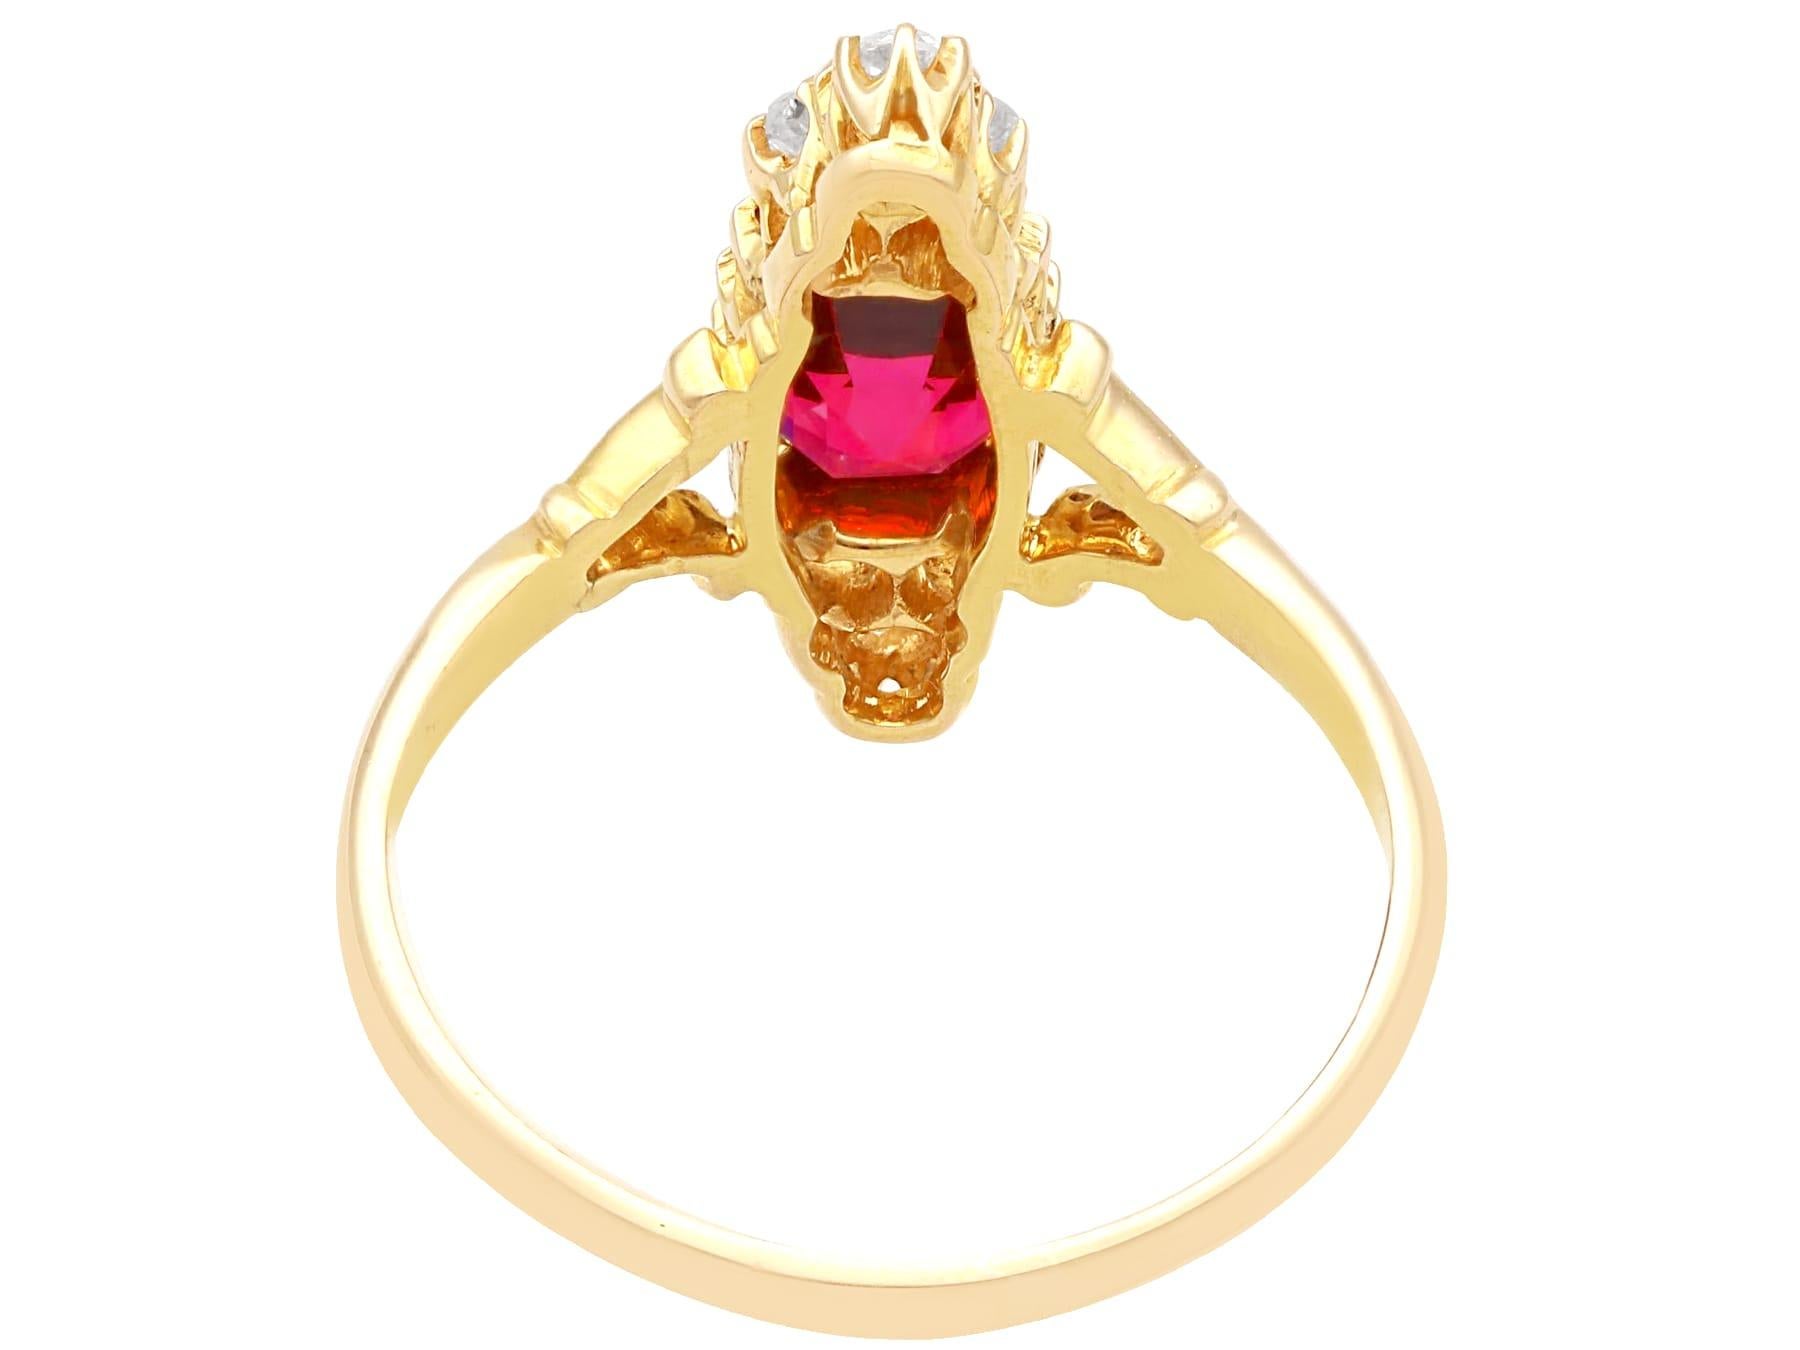 Antique 1910s 2.48 Carat Garnet and Diamond 18k Yellow Gold Cocktail Ring In Excellent Condition For Sale In Jesmond, Newcastle Upon Tyne